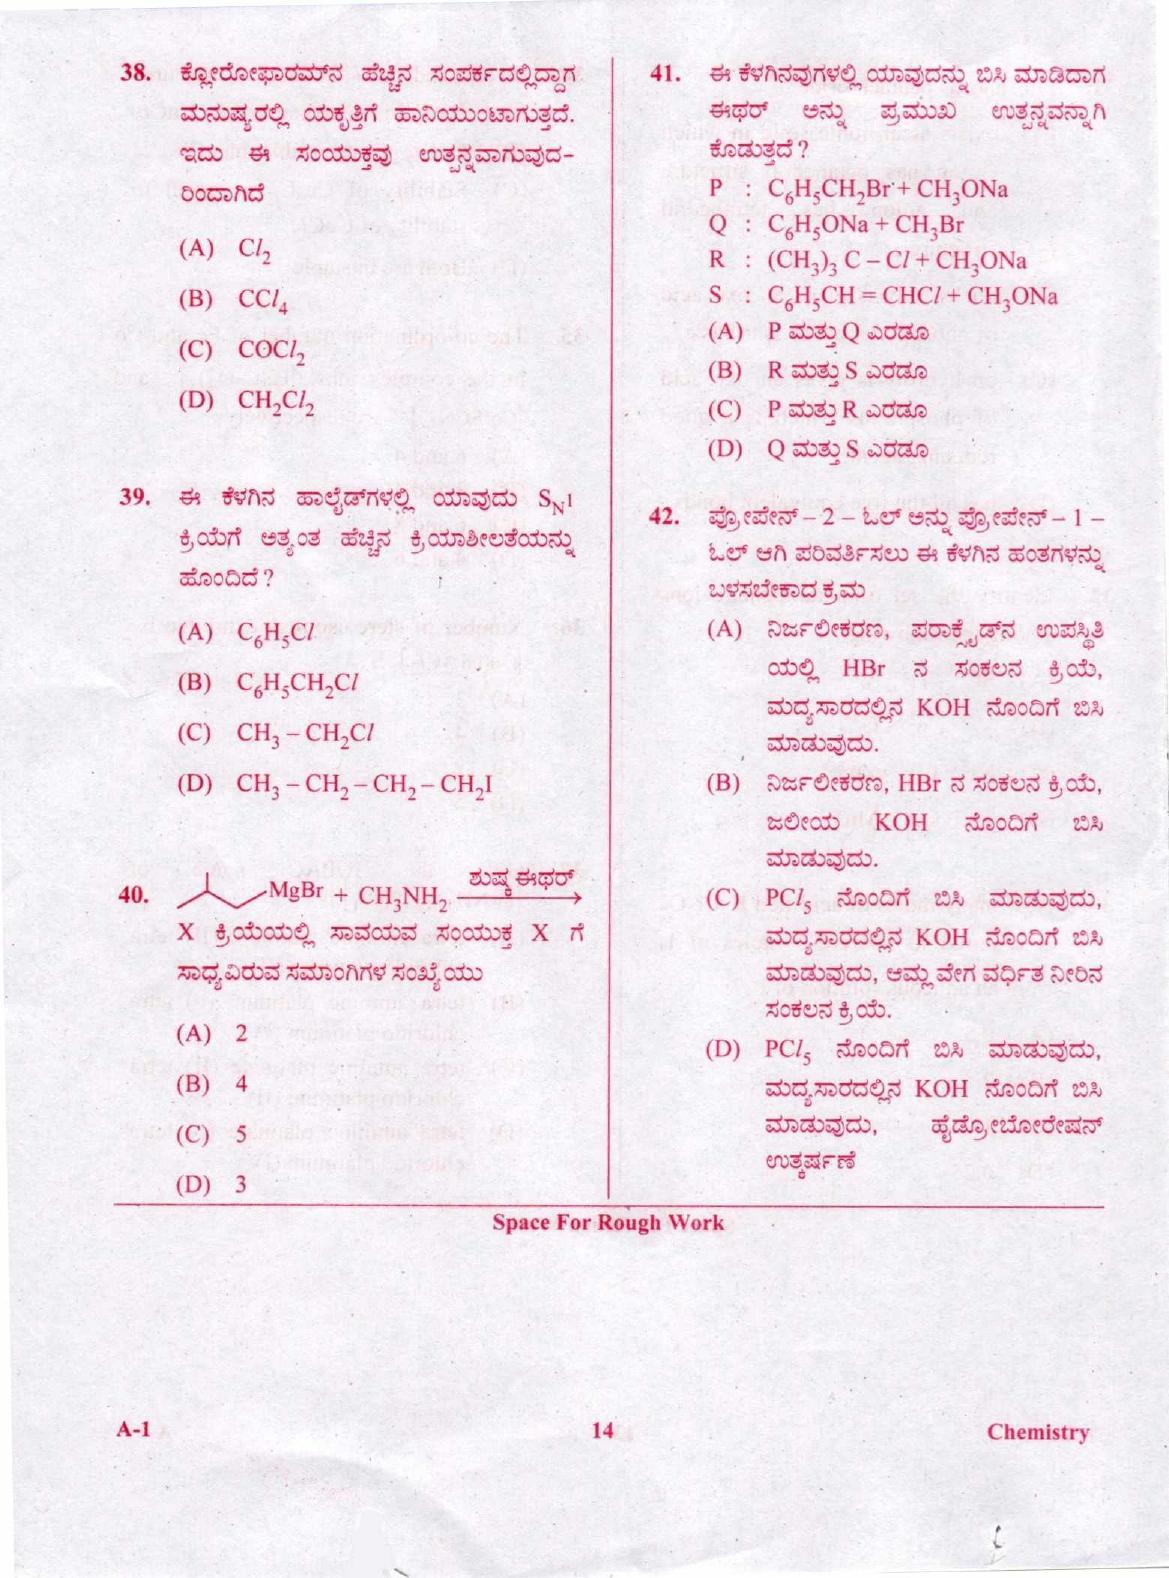 KCET Chemistry 2020 Question Papers - Page 14